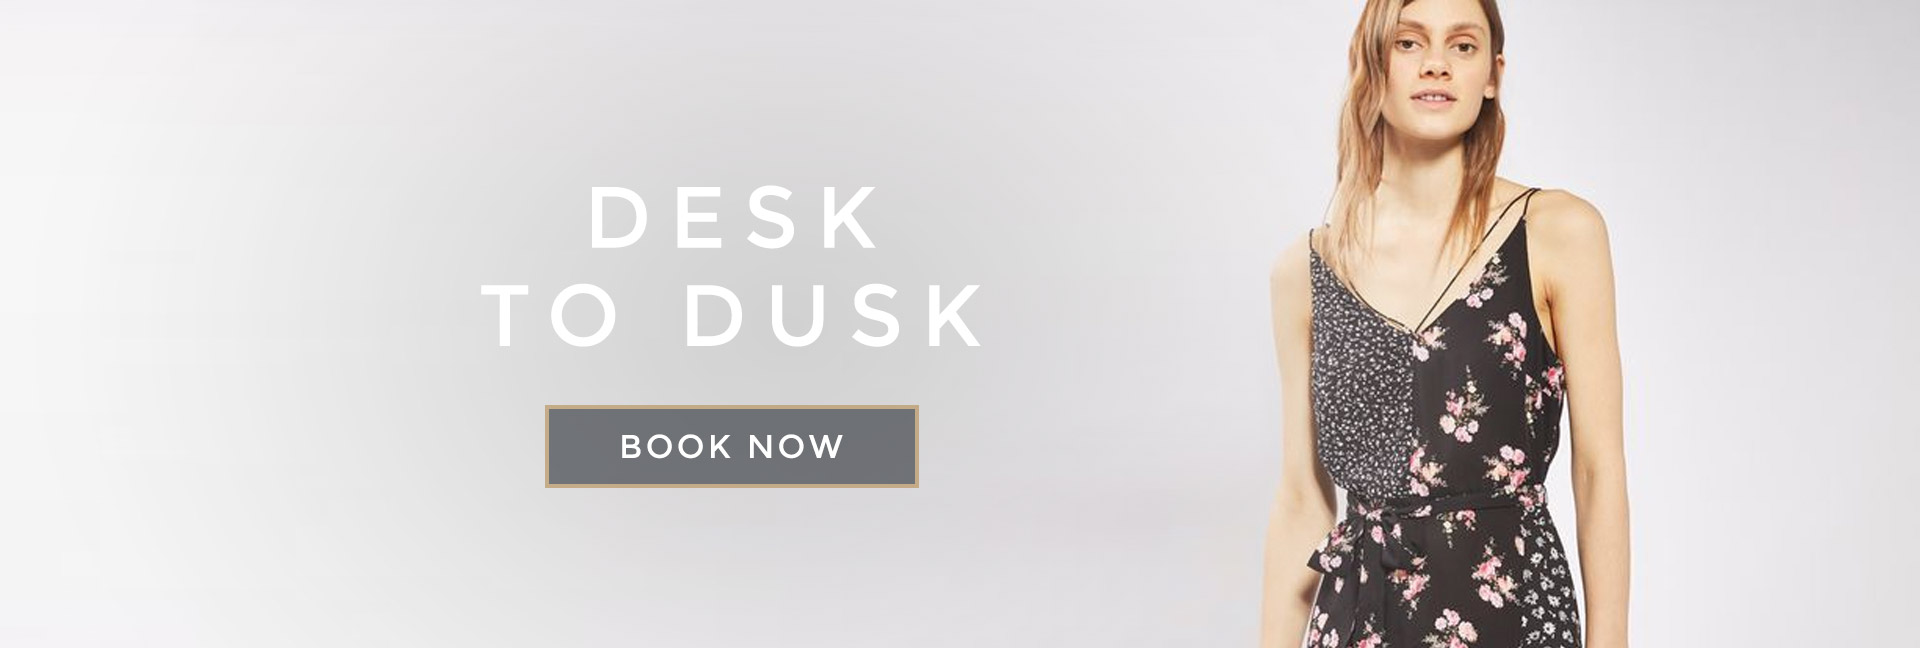 Desk to Dusk at All Bar One Newhall Street Birmingham - Book your table